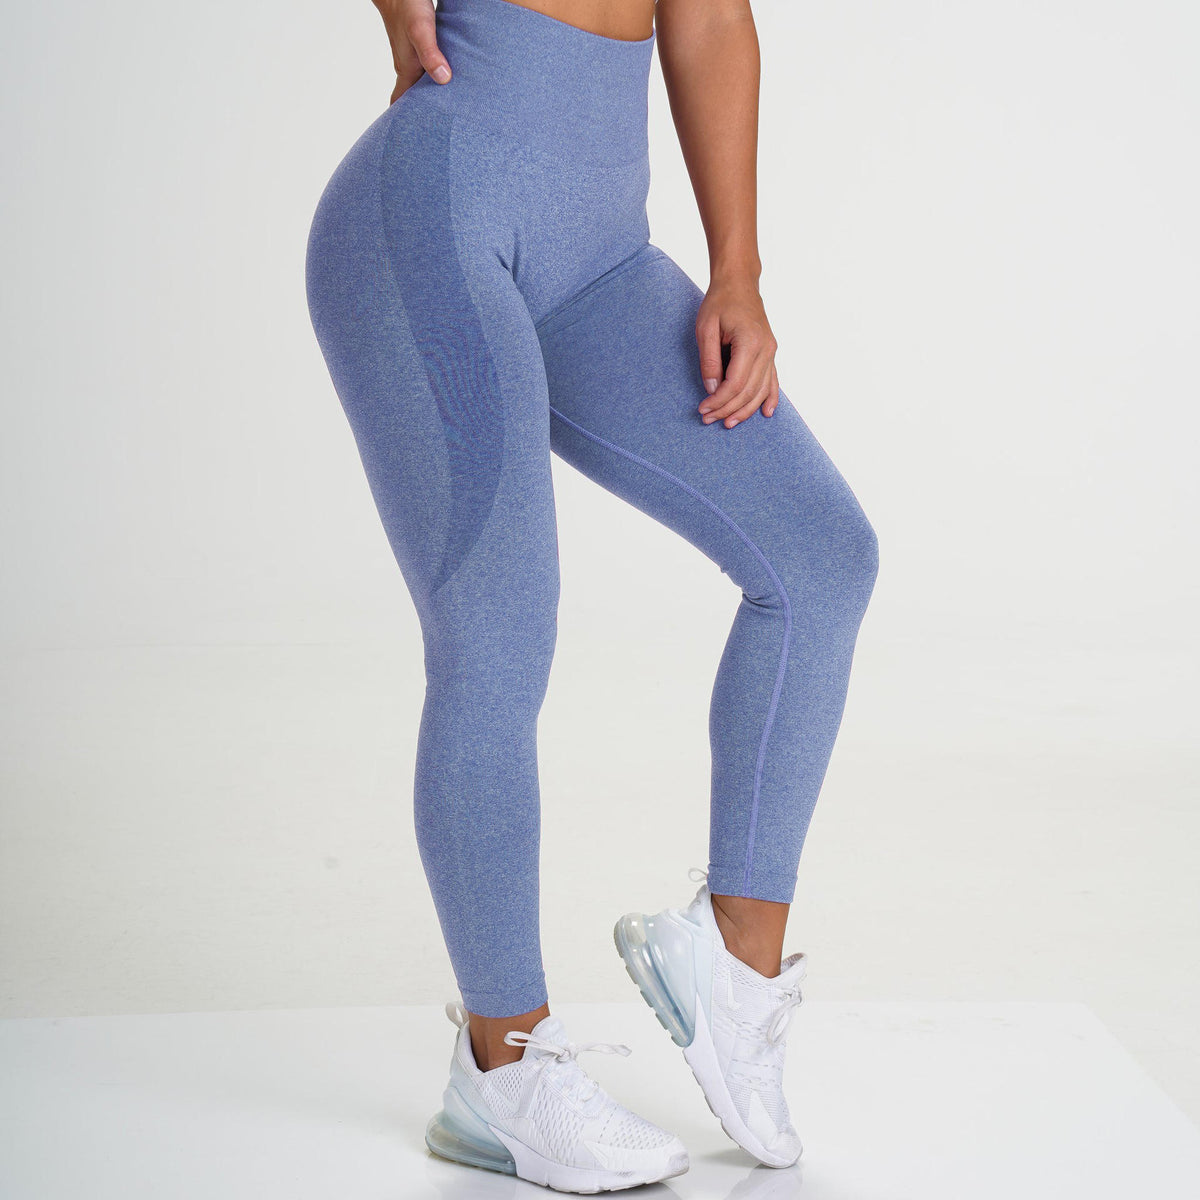 ZQGJB Yoga Pants for Women Non See Through-High Waisted Tummy Control  Tights Leggings Solid Color Workout Sports Running Athletic Skinny Pants  Blue XL